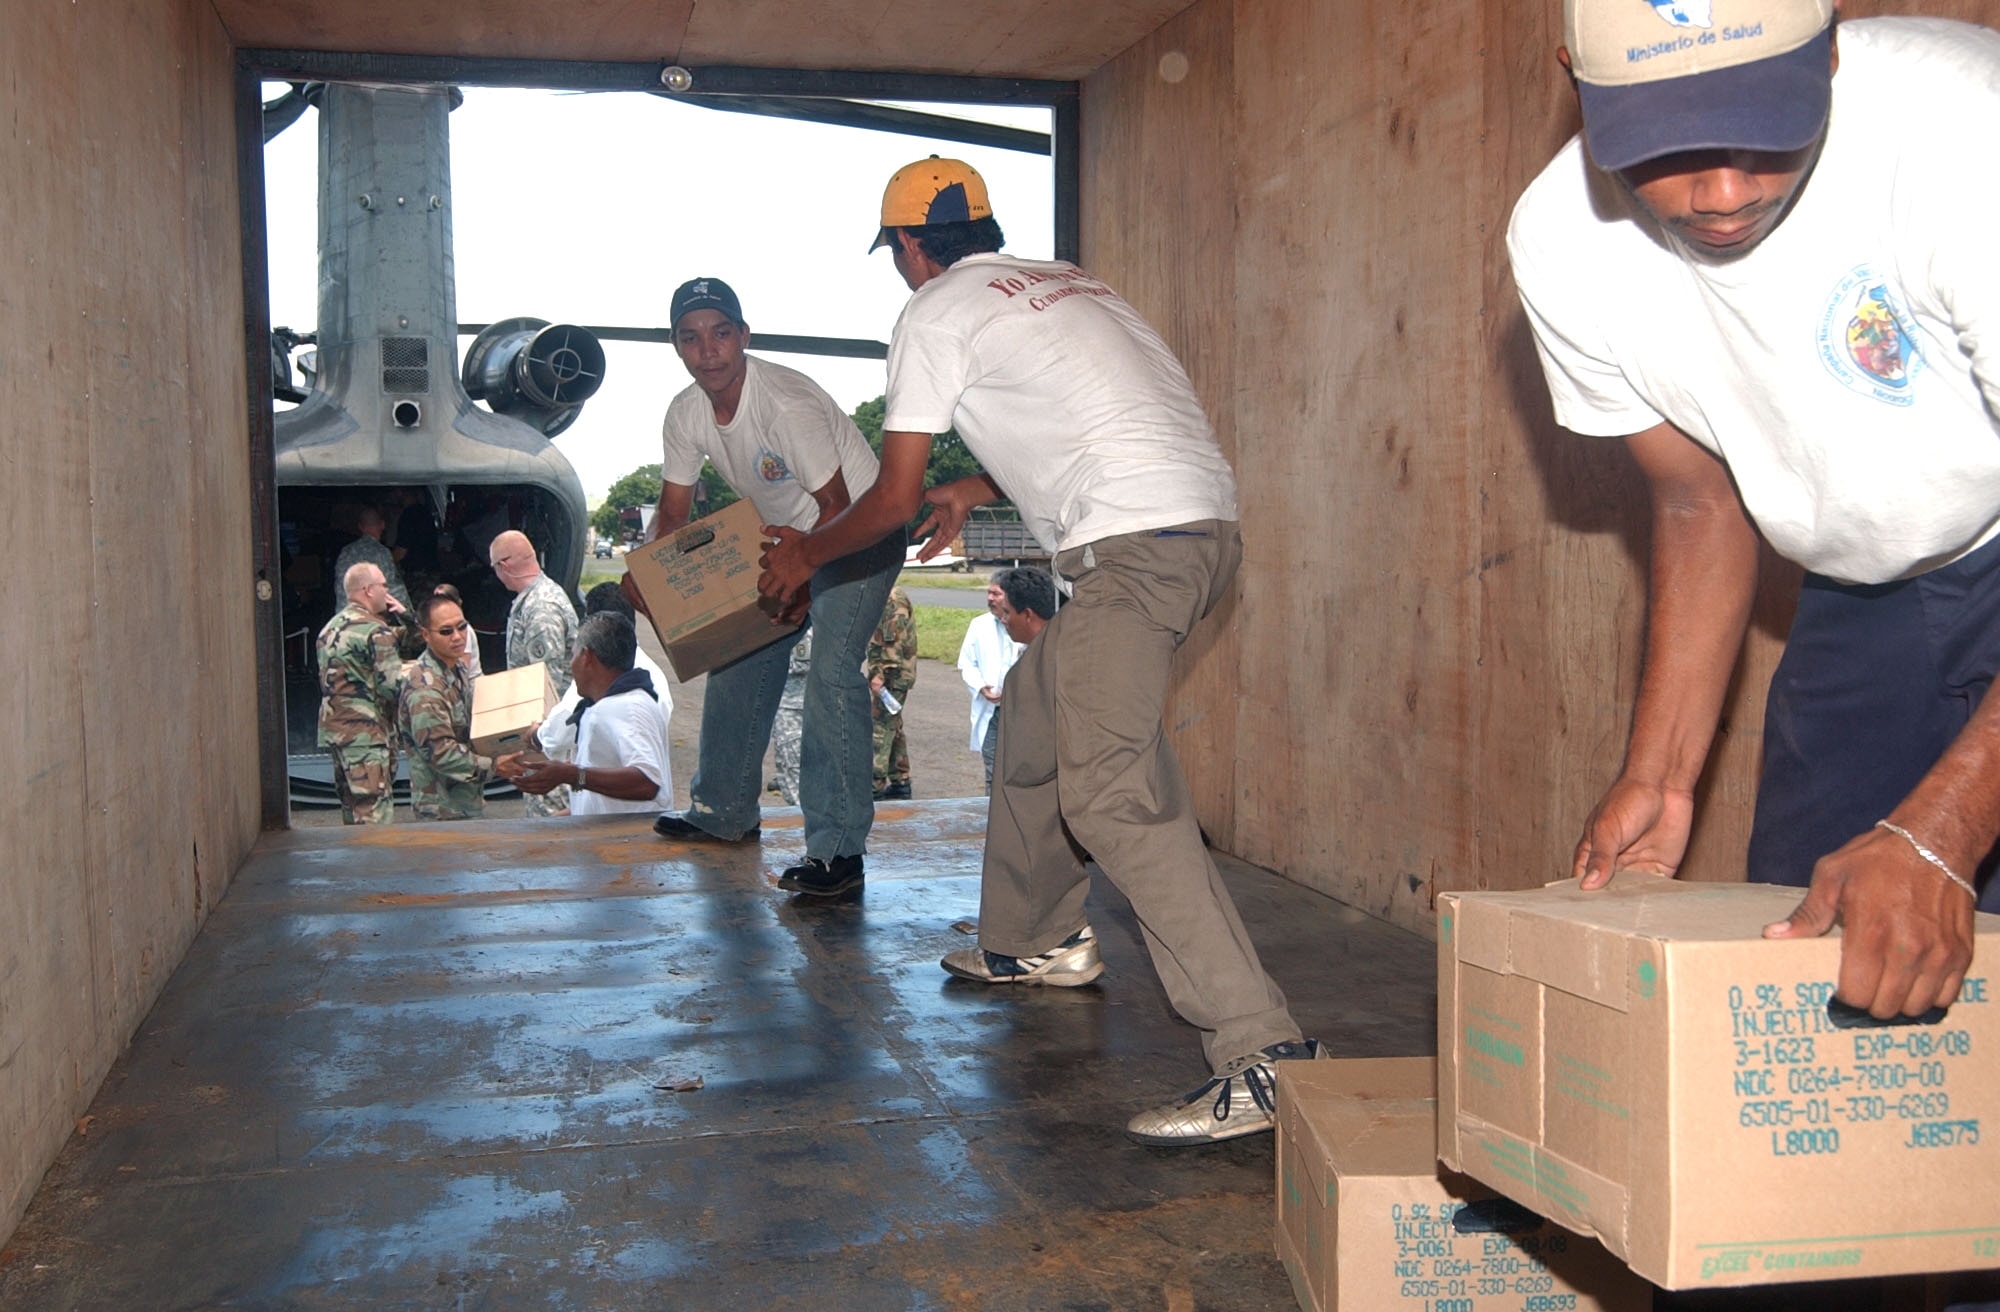 Staff from the Nicaragua Ministry of Health and U.S. servicemembers load medical supplies onto a truck at the airport in Leon, Nicaragua, Sept. 13. Joint Task Force-Bravo members at Soto Cano Air Base, Honduras, donated more than $185,000 worth of medical equipment and supplies to a hospital where people were being treated after an alcohol poisoning epidemic. (U.S. Air Force photo/Capt. Alysia Harvey) 